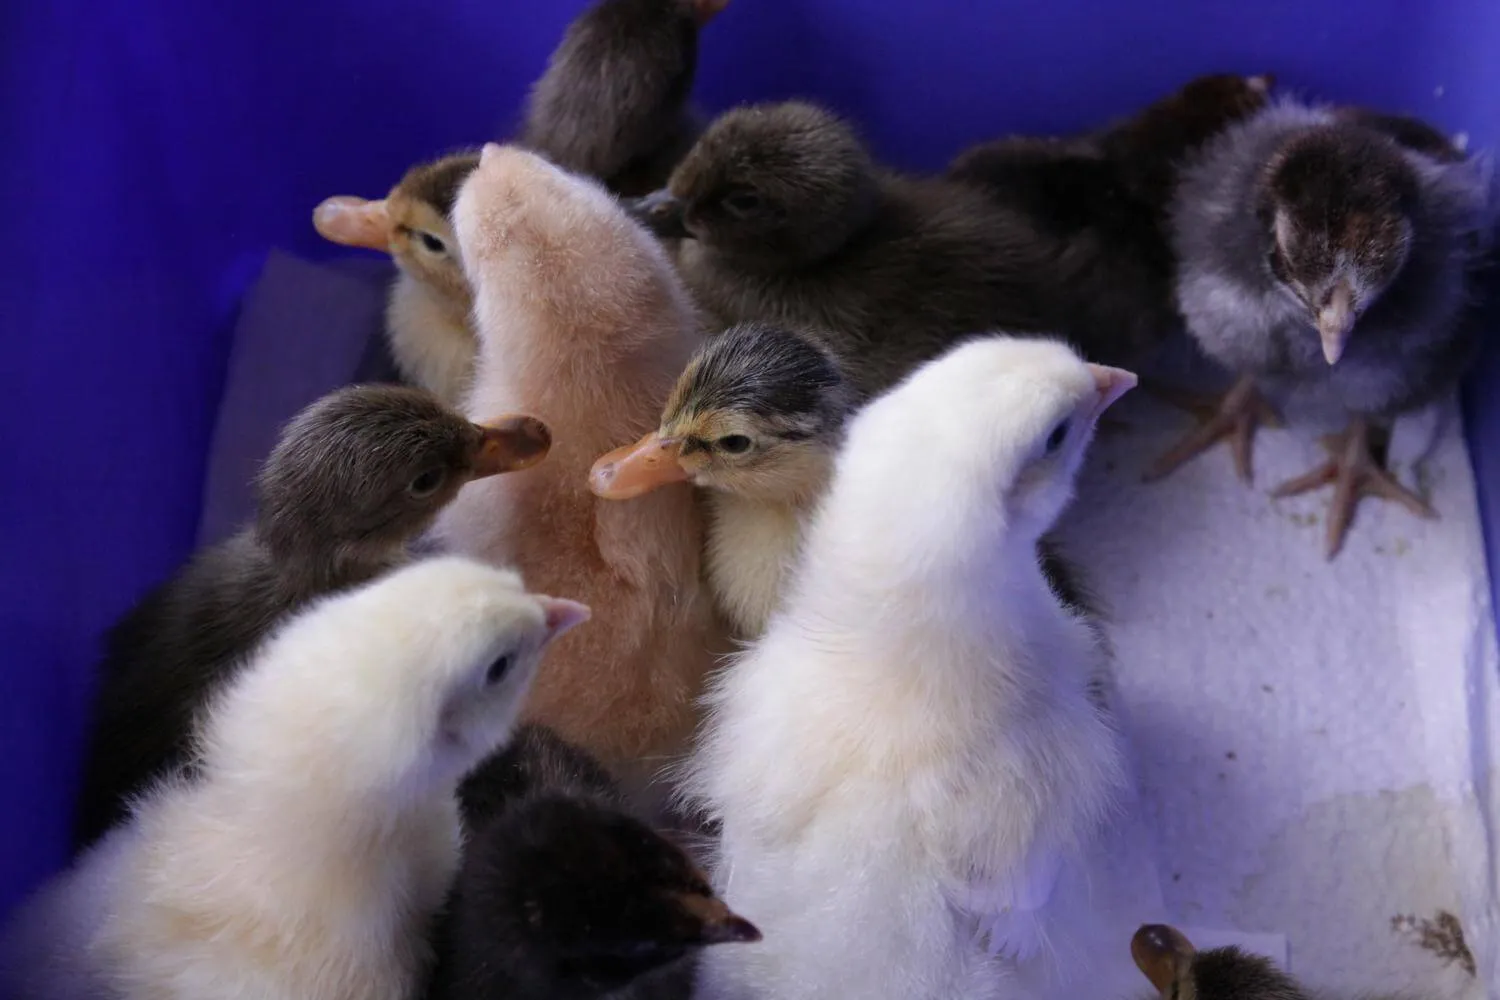 ducklings and chicks in a small brooder